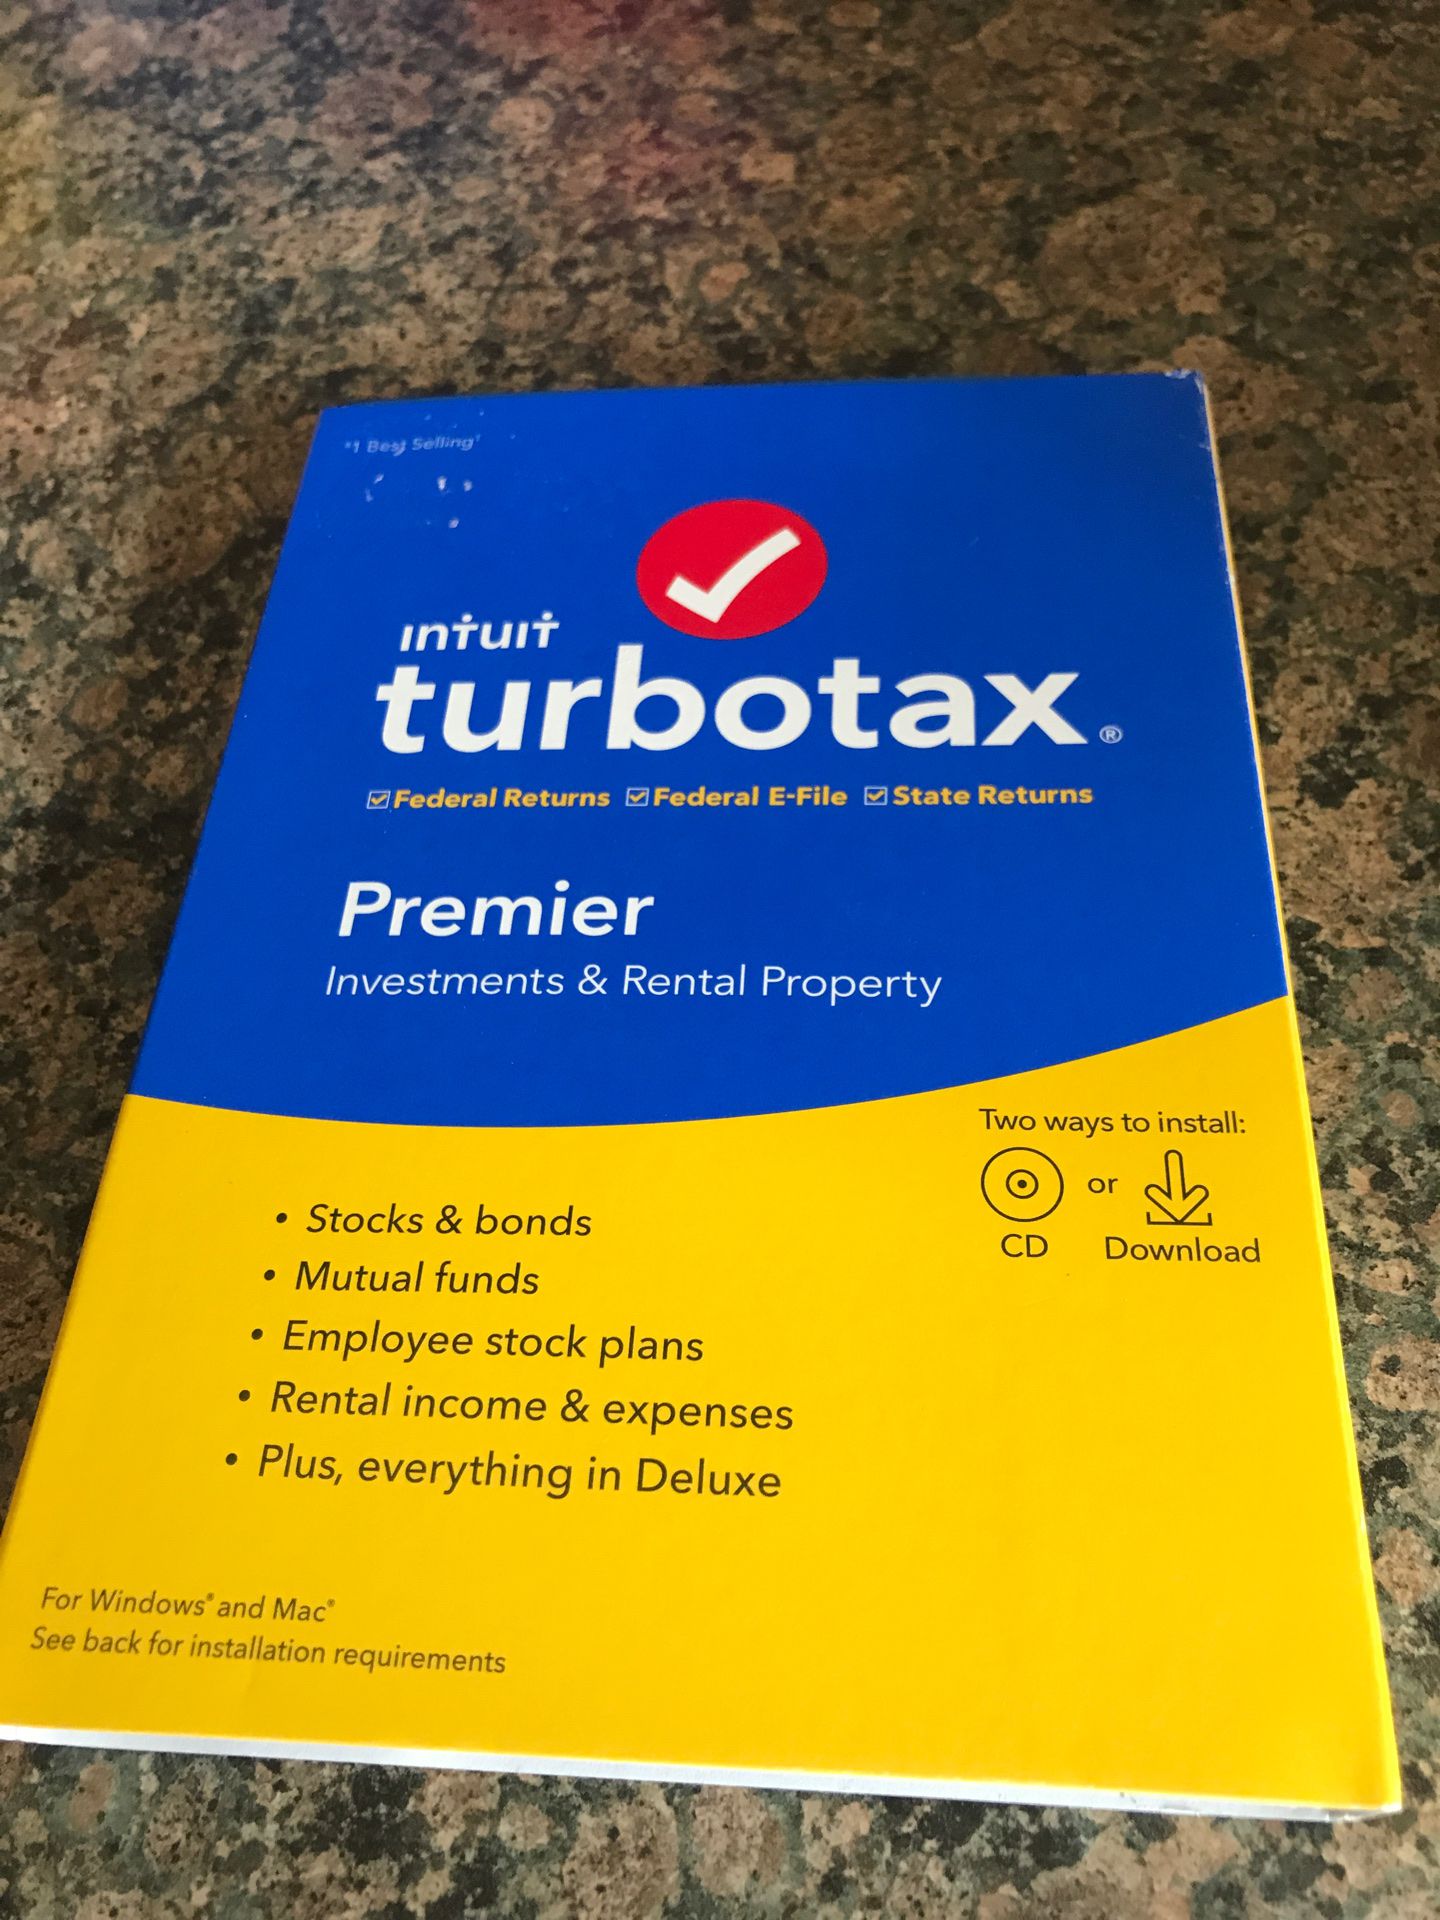 TurboTax premier investment and rental property new sealed